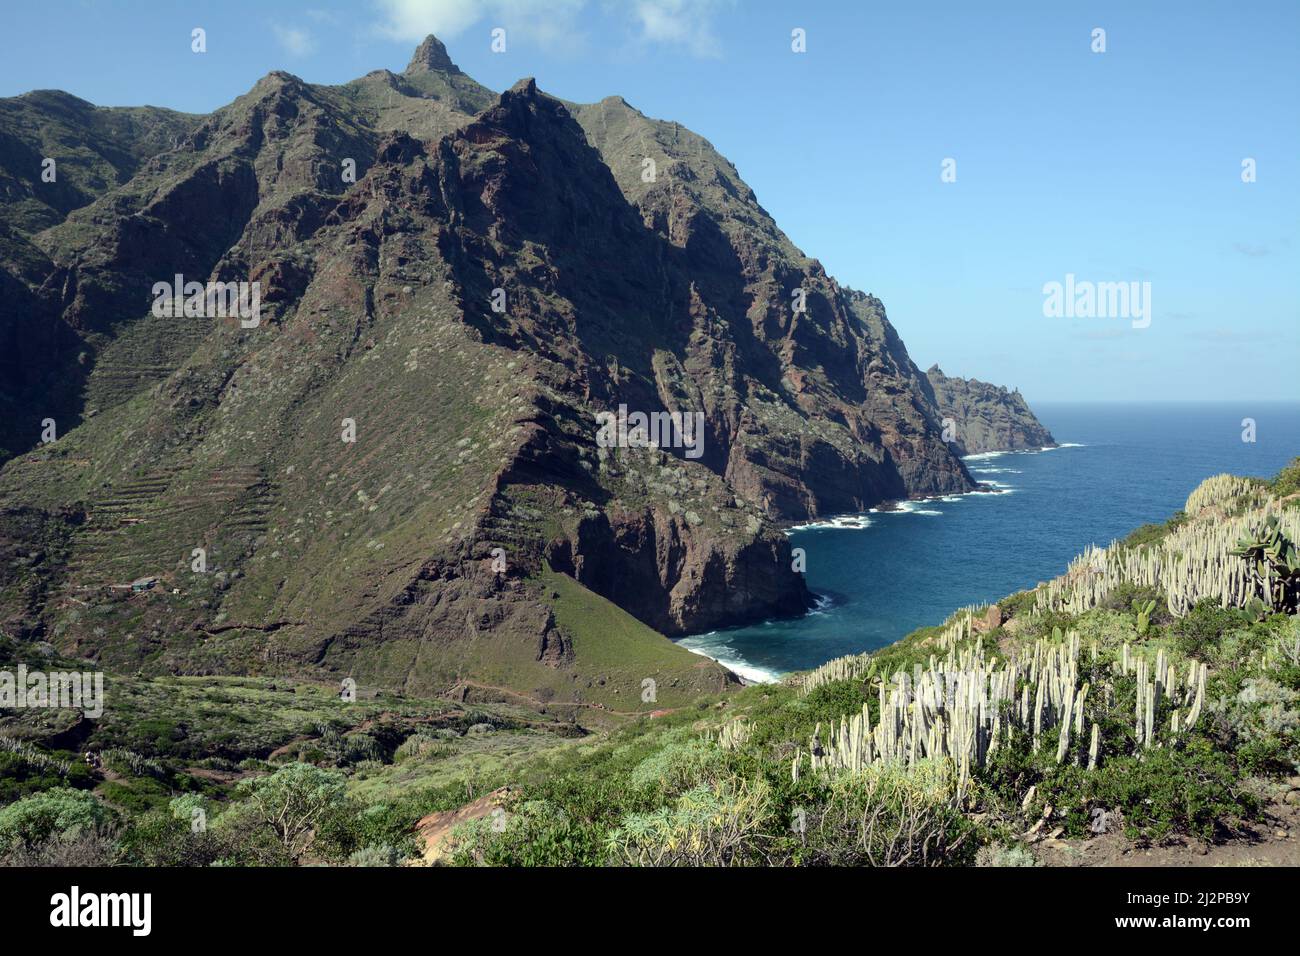 Along the hiking trail to Playa de Tamadite in the Anaga Mountains on the north coast of Tenerife, near Taganana, Canary Islands, Spain. Stock Photo